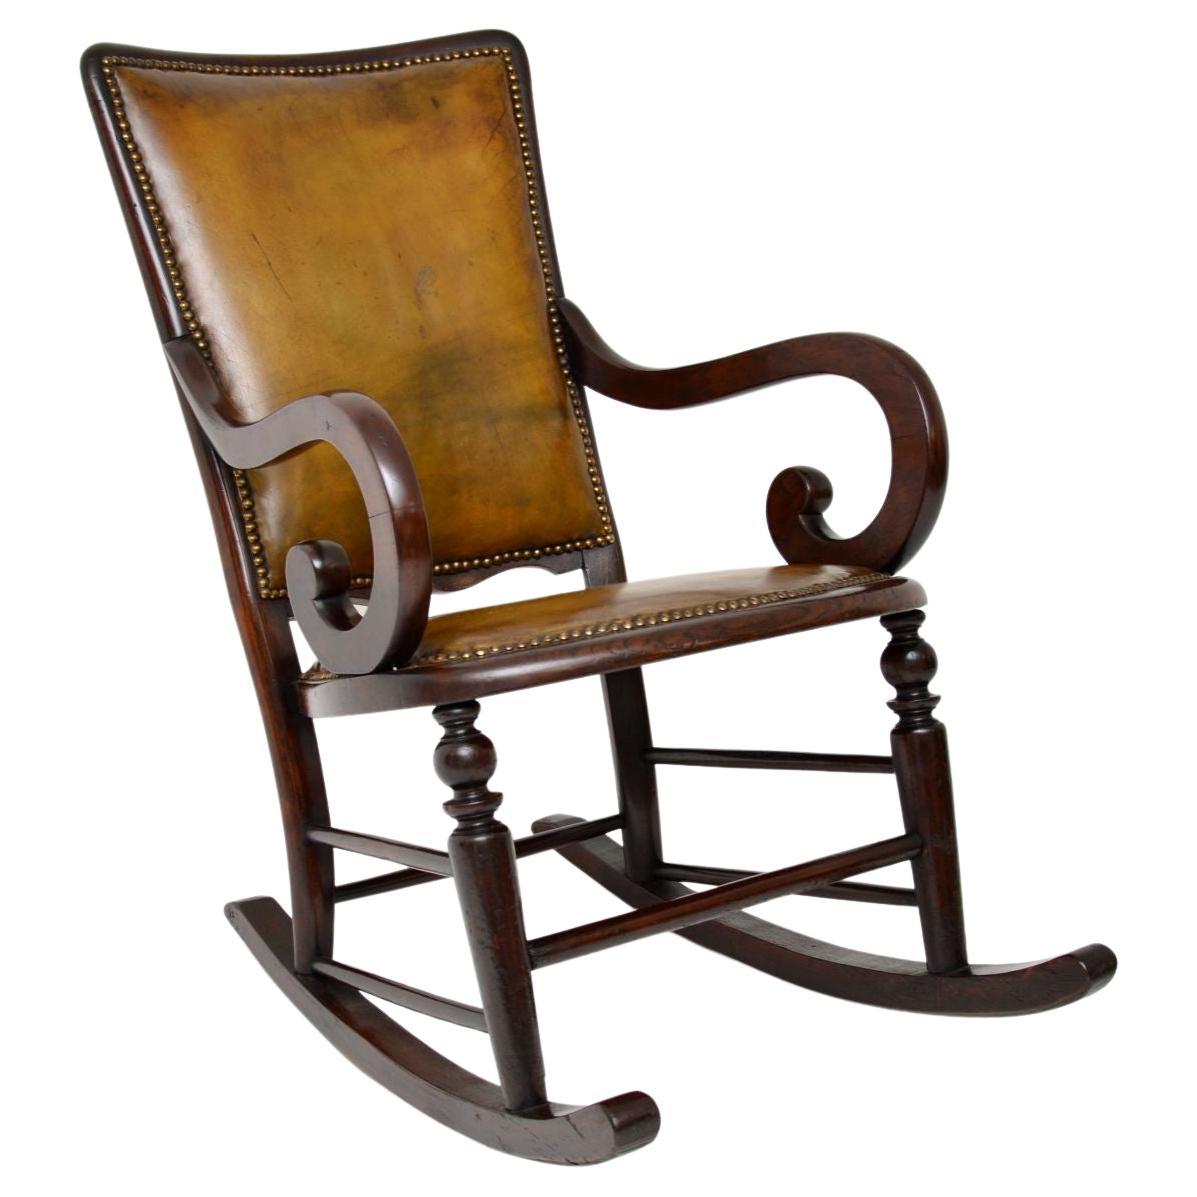 Antique Victorian Leather Rocking Chair